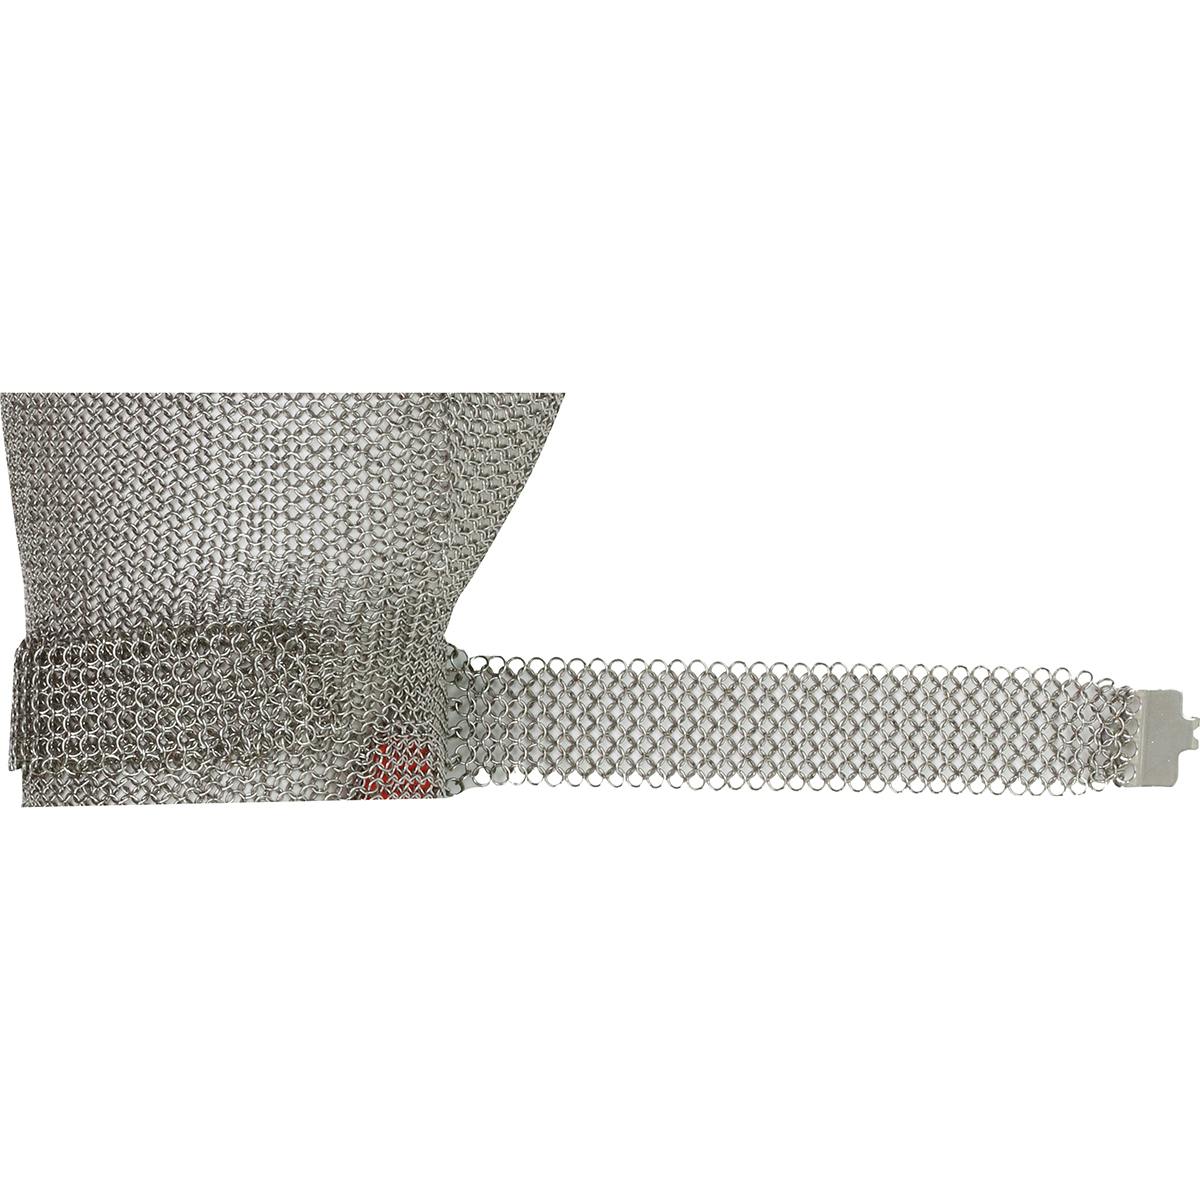 US Mesh® Stainless Steel Mesh Glove with Spring Closure - Forearm Length (USM-1547)